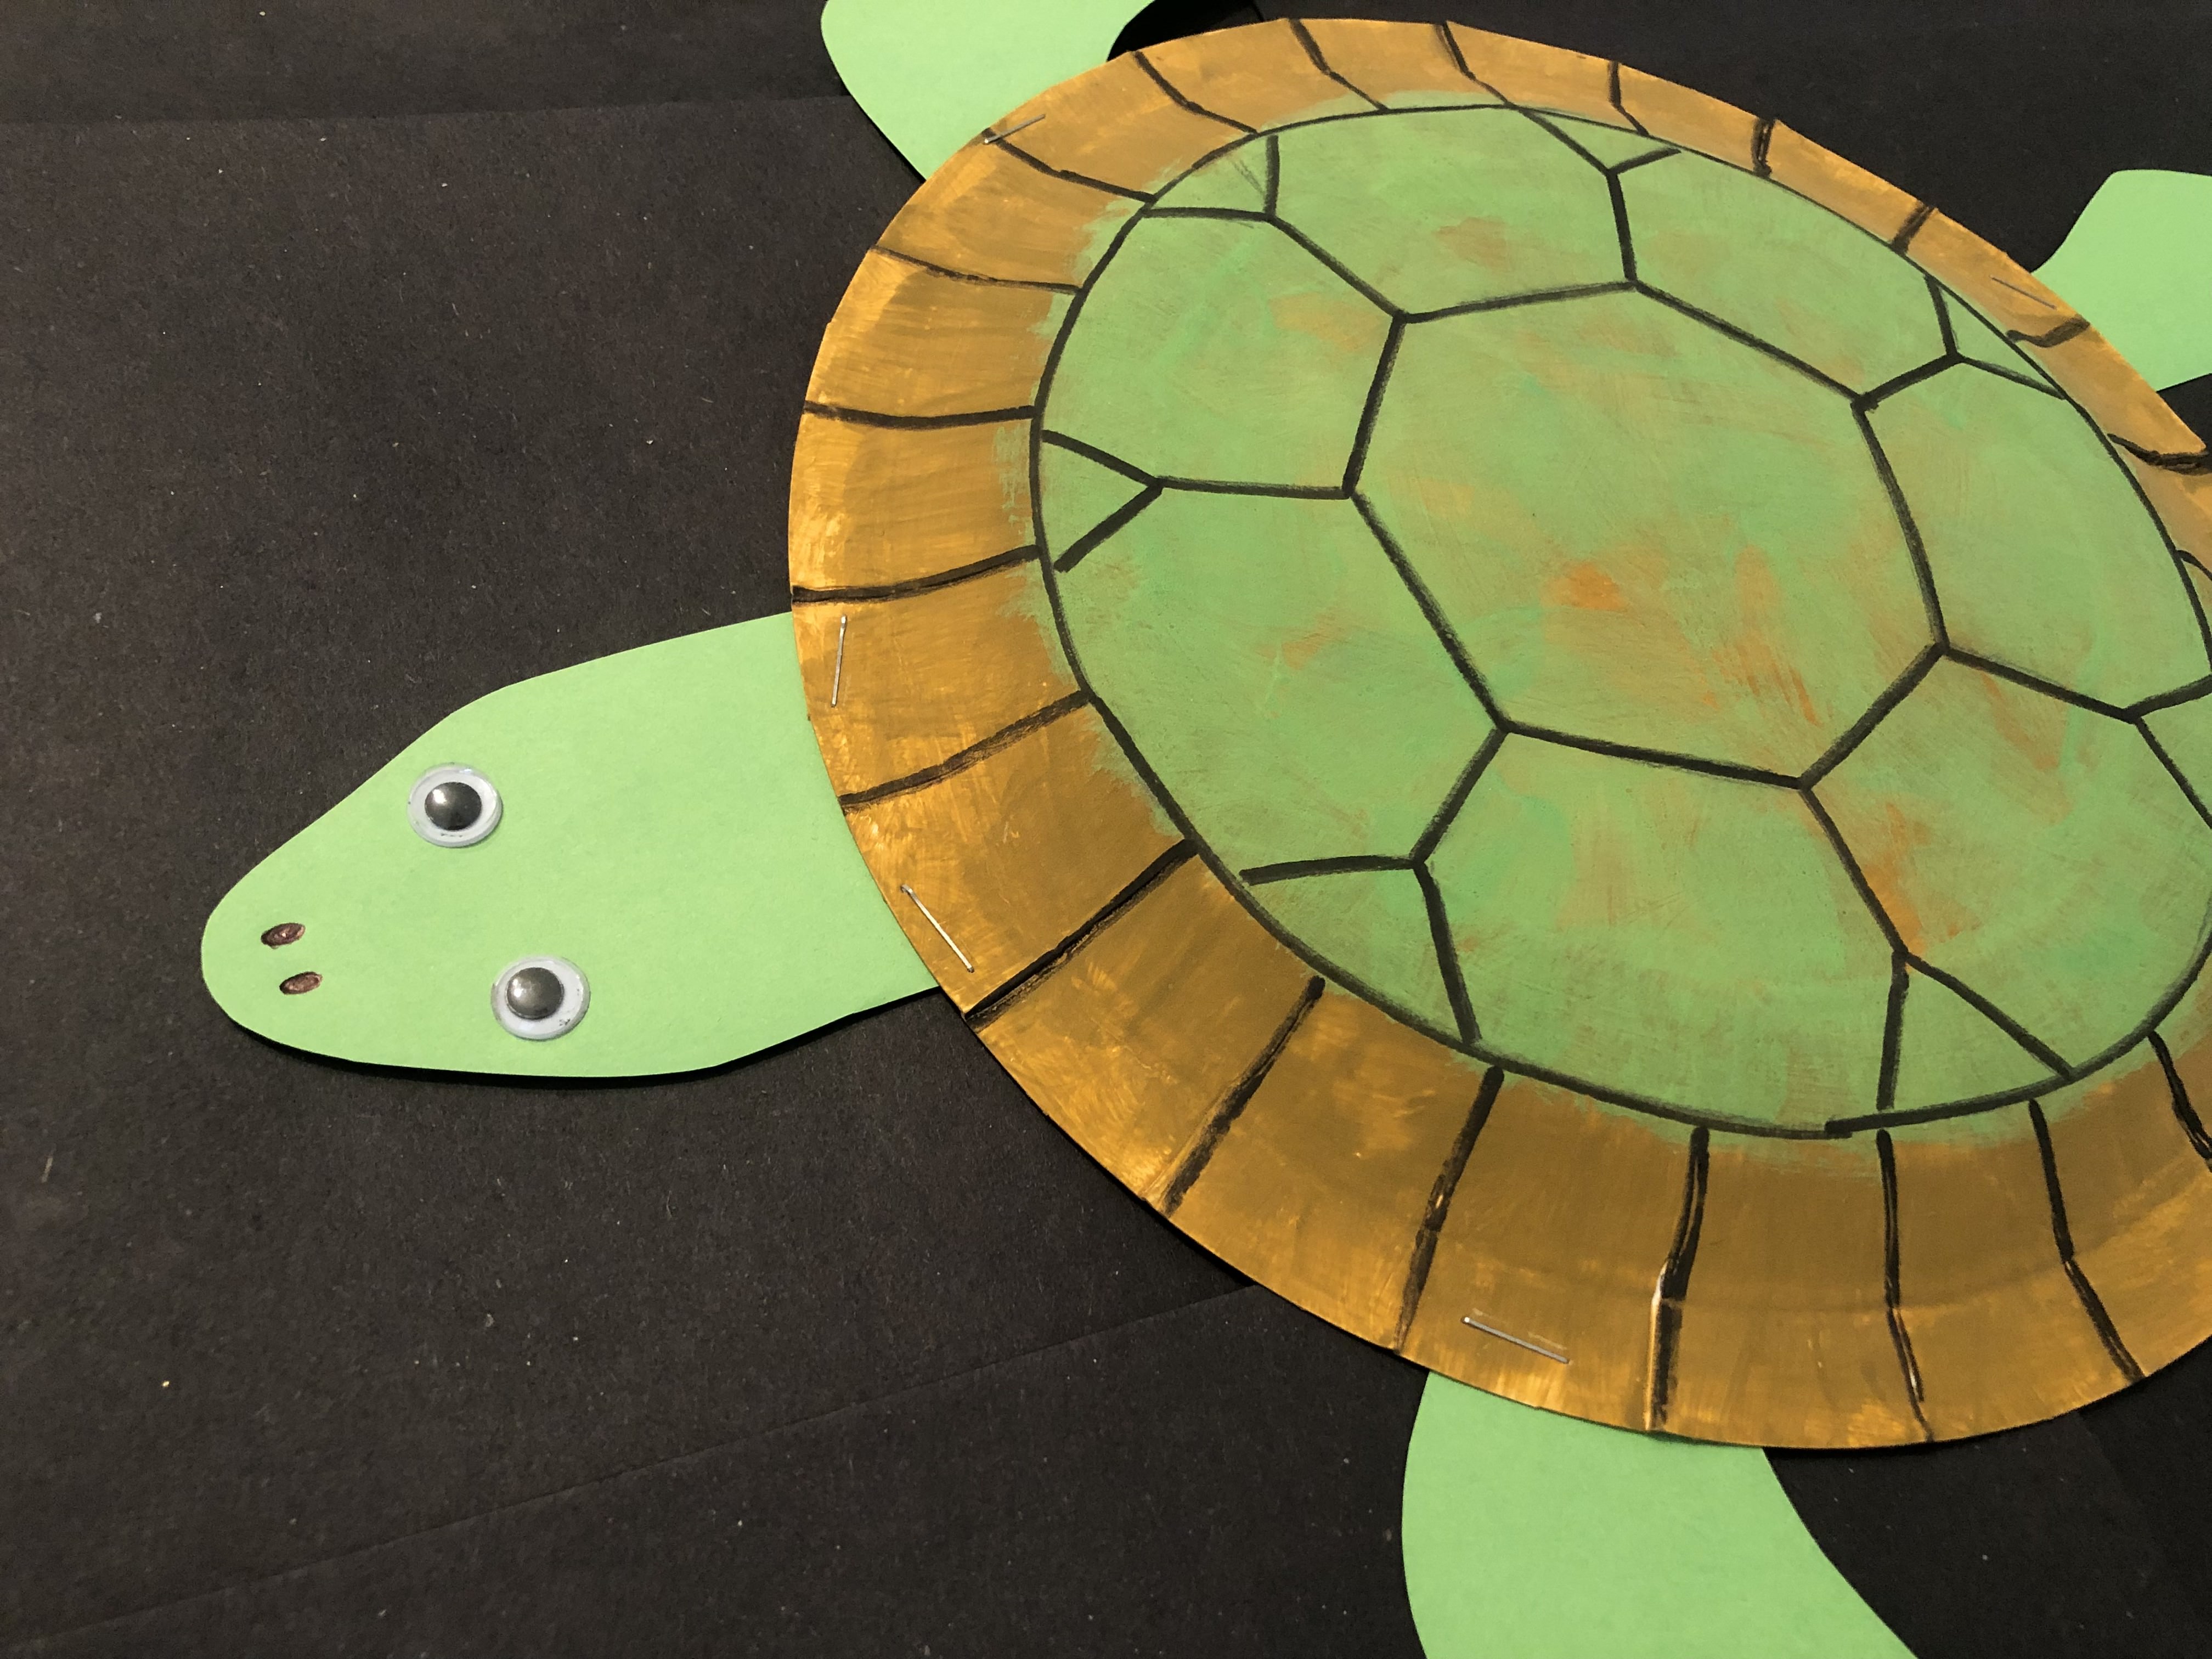 Create a Turtle Step 6: Lastly, add goggly eyes and detail to the turtle!